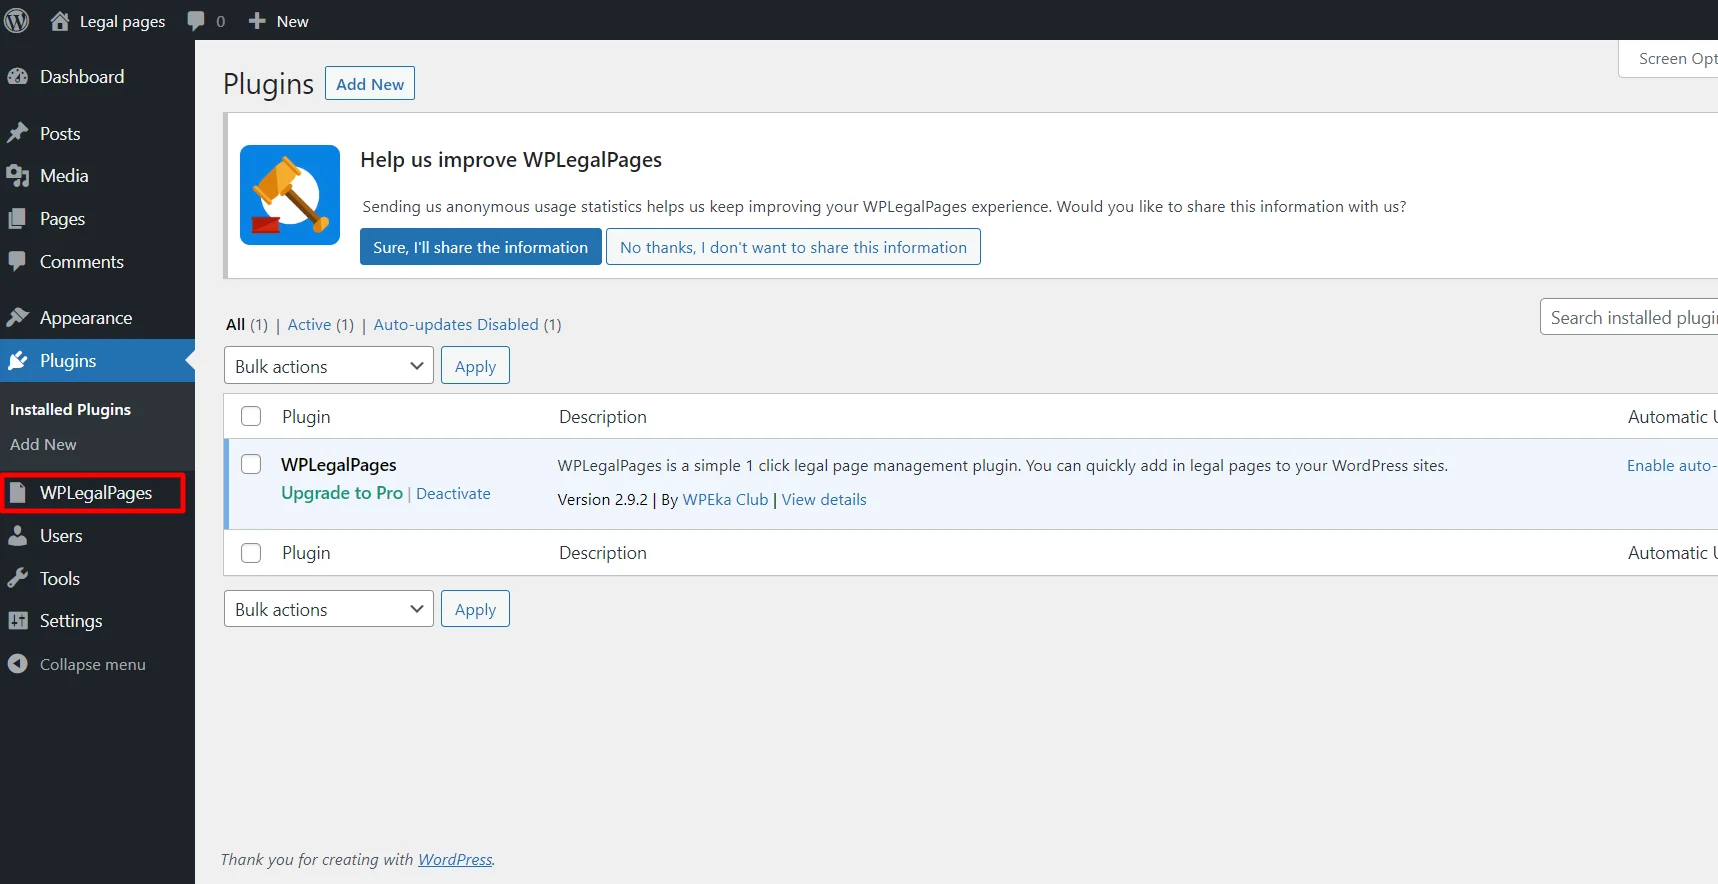 WP Legal Pages plugin appears in the dashboard